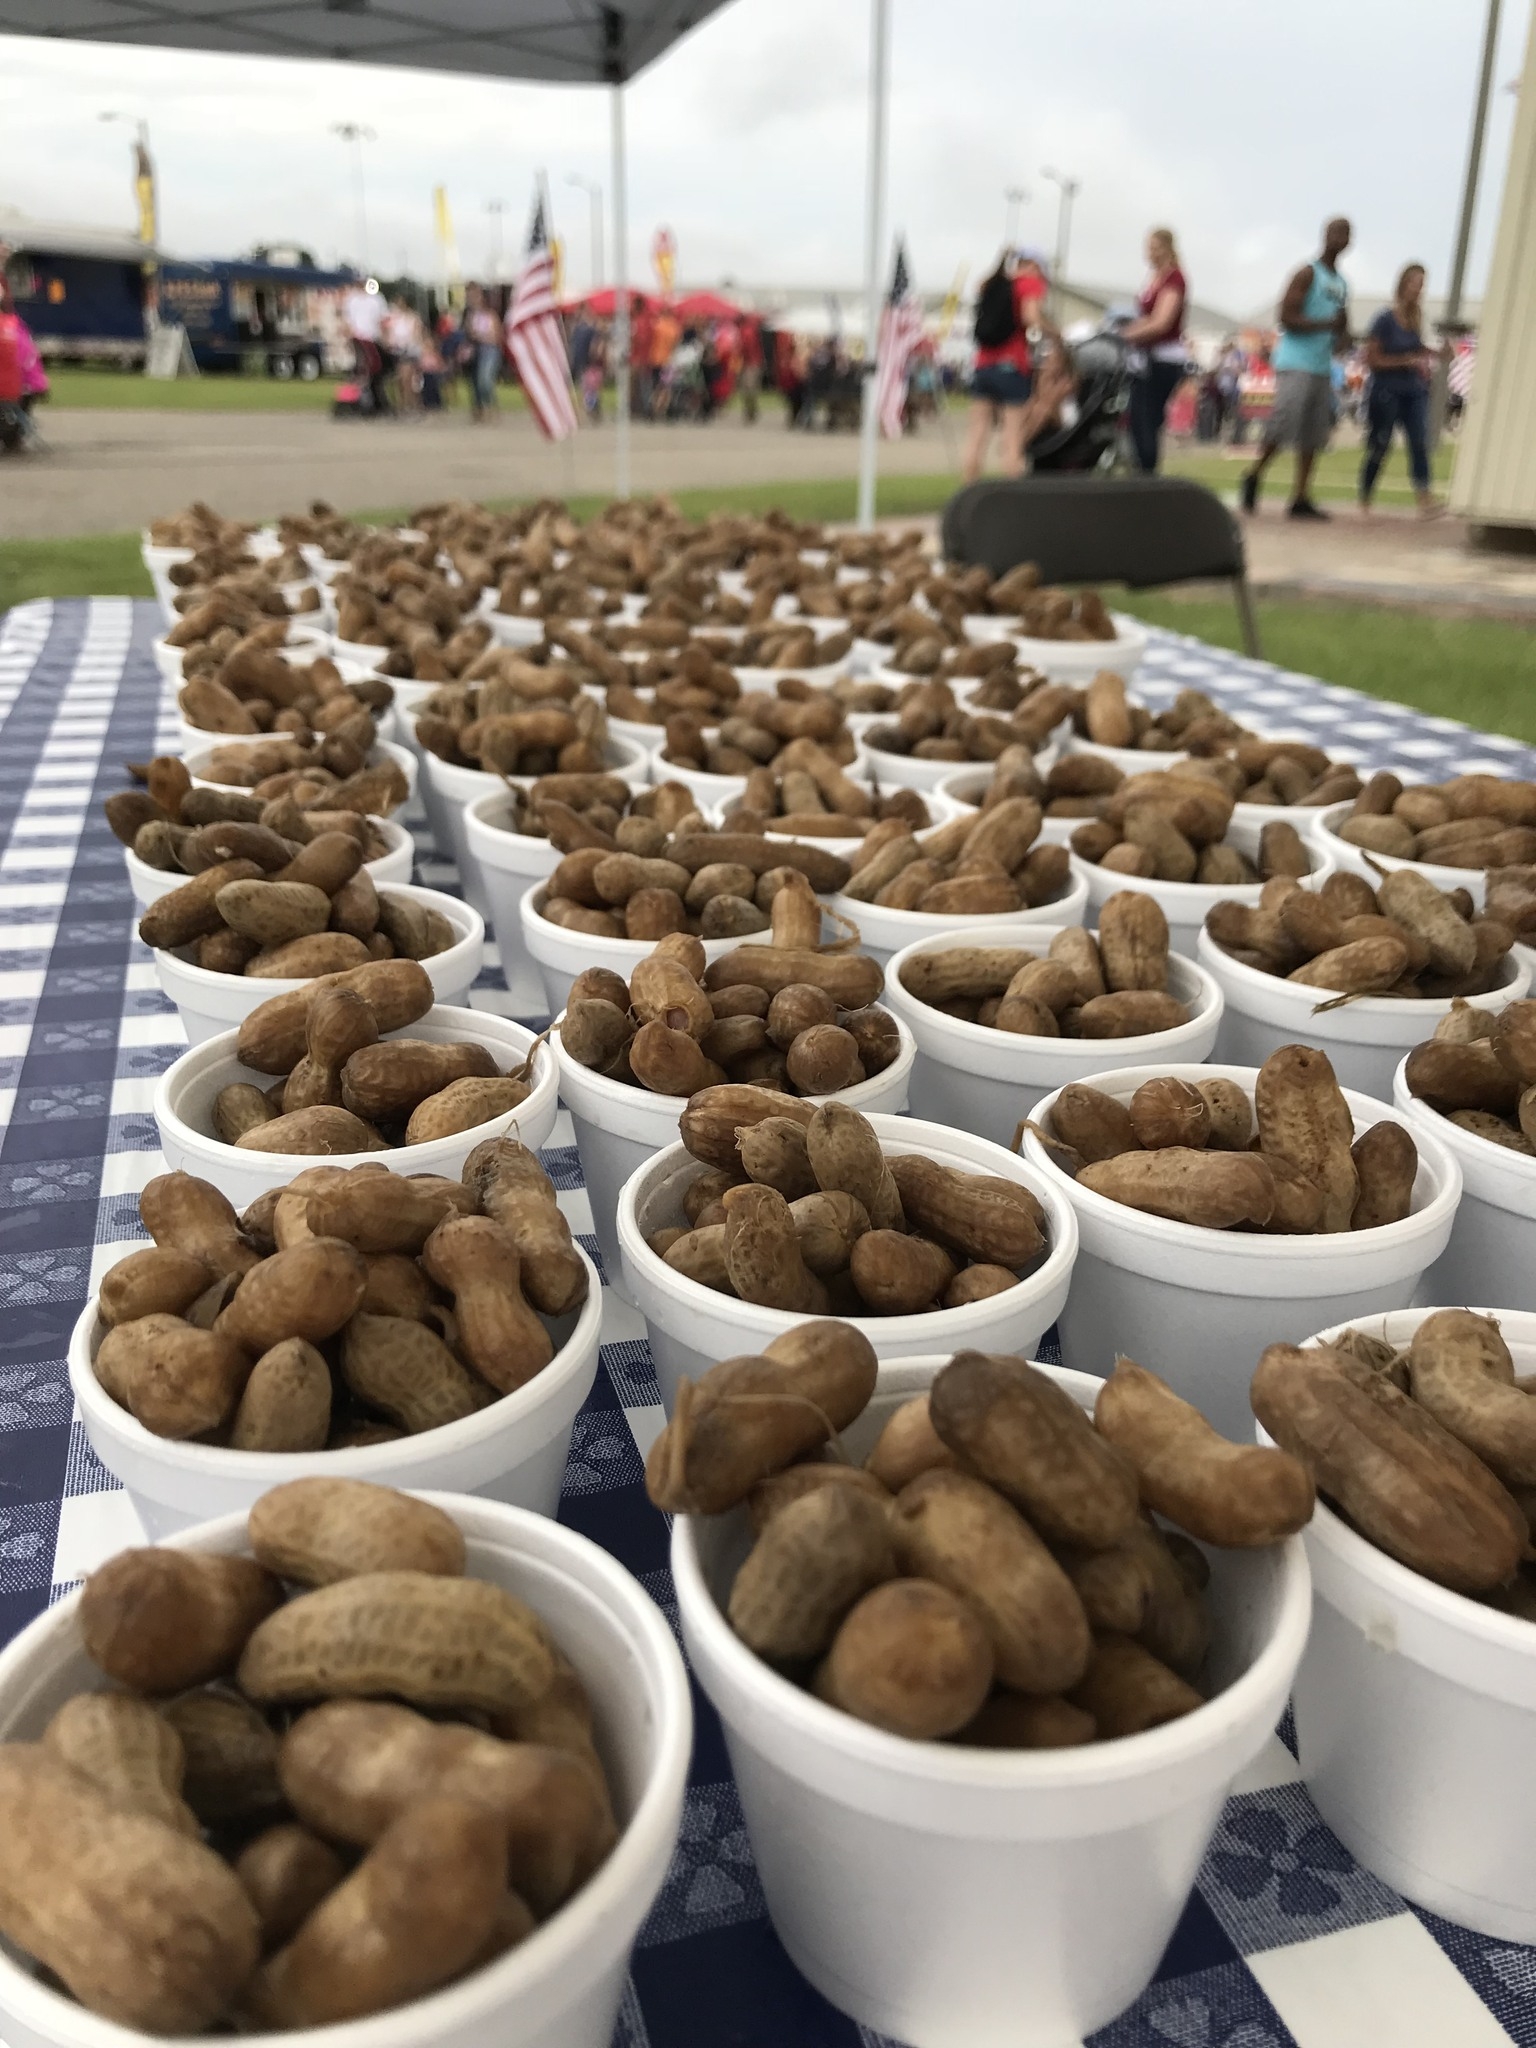 A collection of large bowls full of peanuts at the National Peanut Festival in Dothan, AL